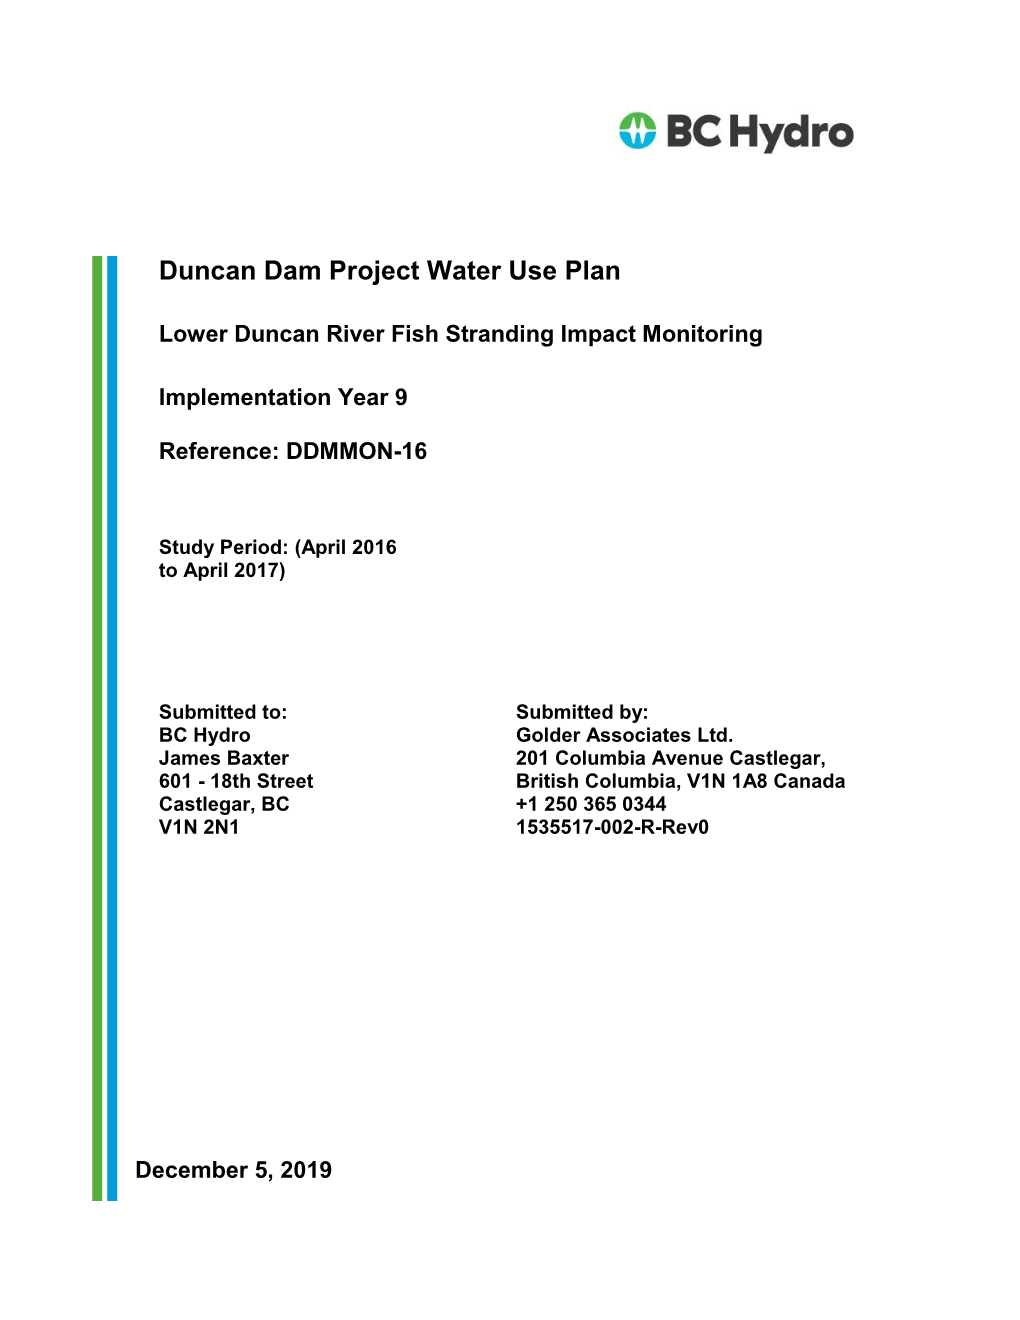 Duncan Dam Project Water Use Plan